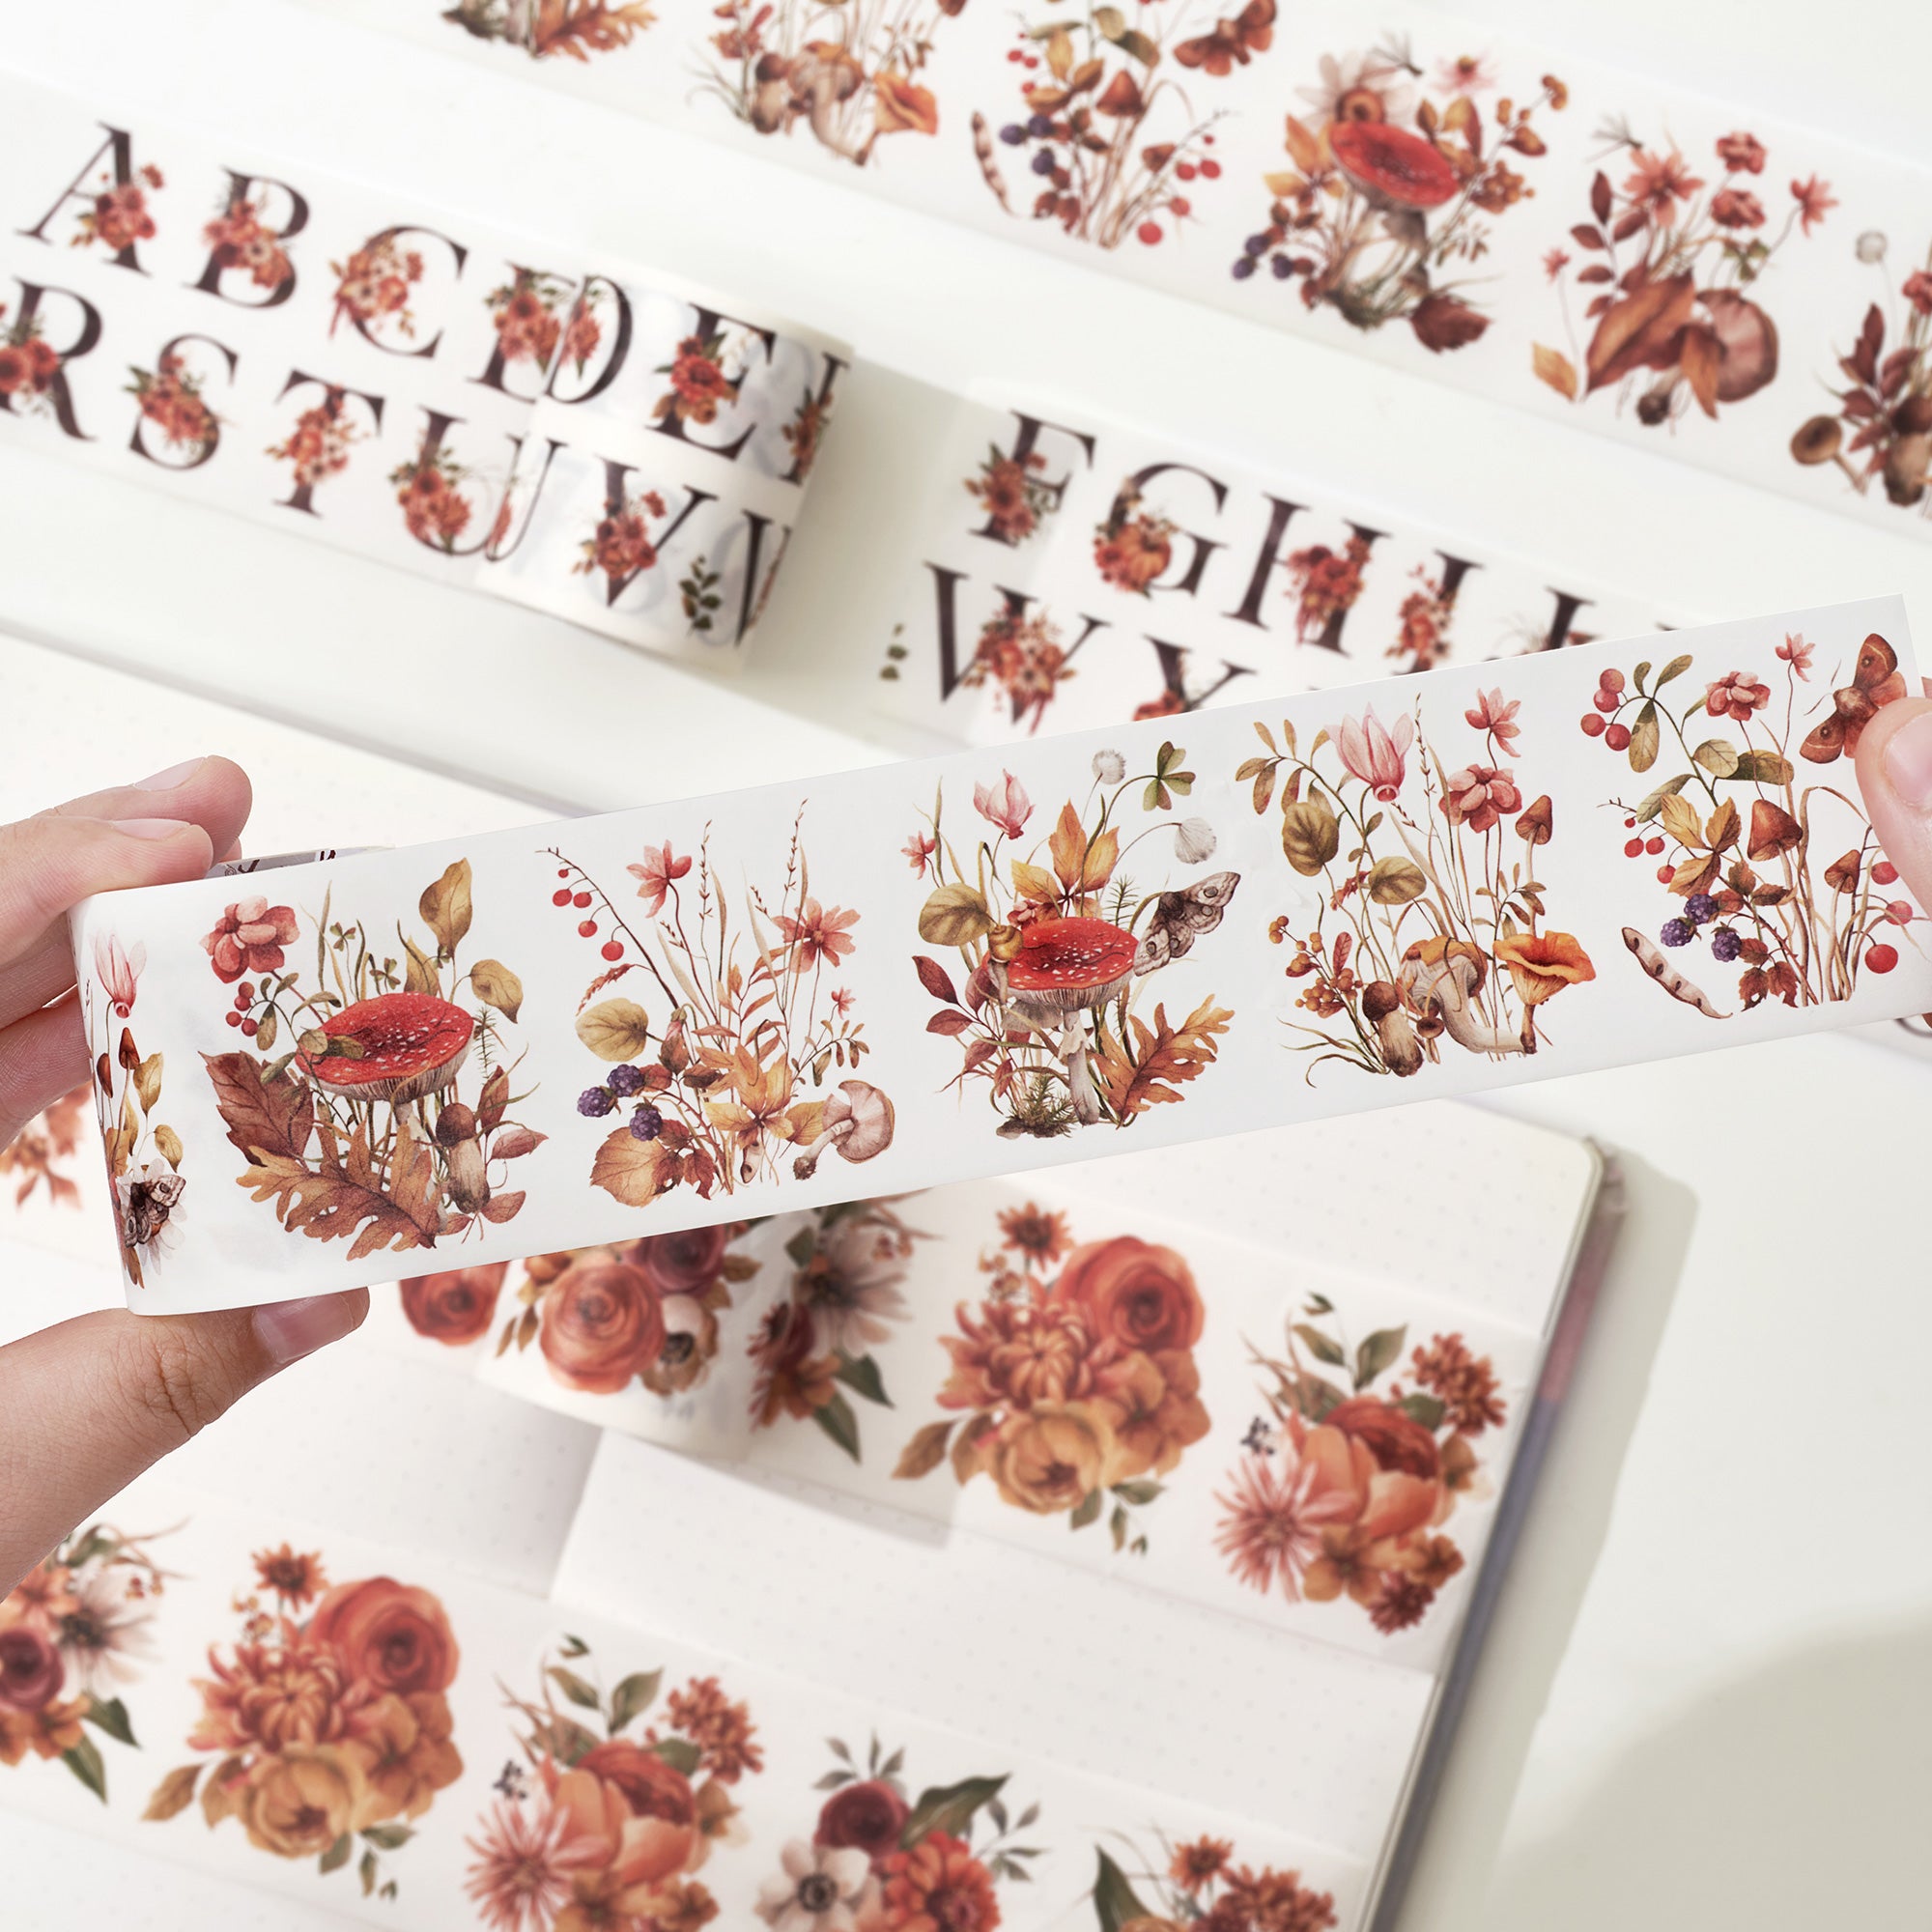 Rustic Botanical Washi Tape Sticker Set | The Washi Tape Shop. Beautiful Washi and Decorative Tape For Bullet Journals, Gift Wrapping, Planner Decoration and DIY Projects